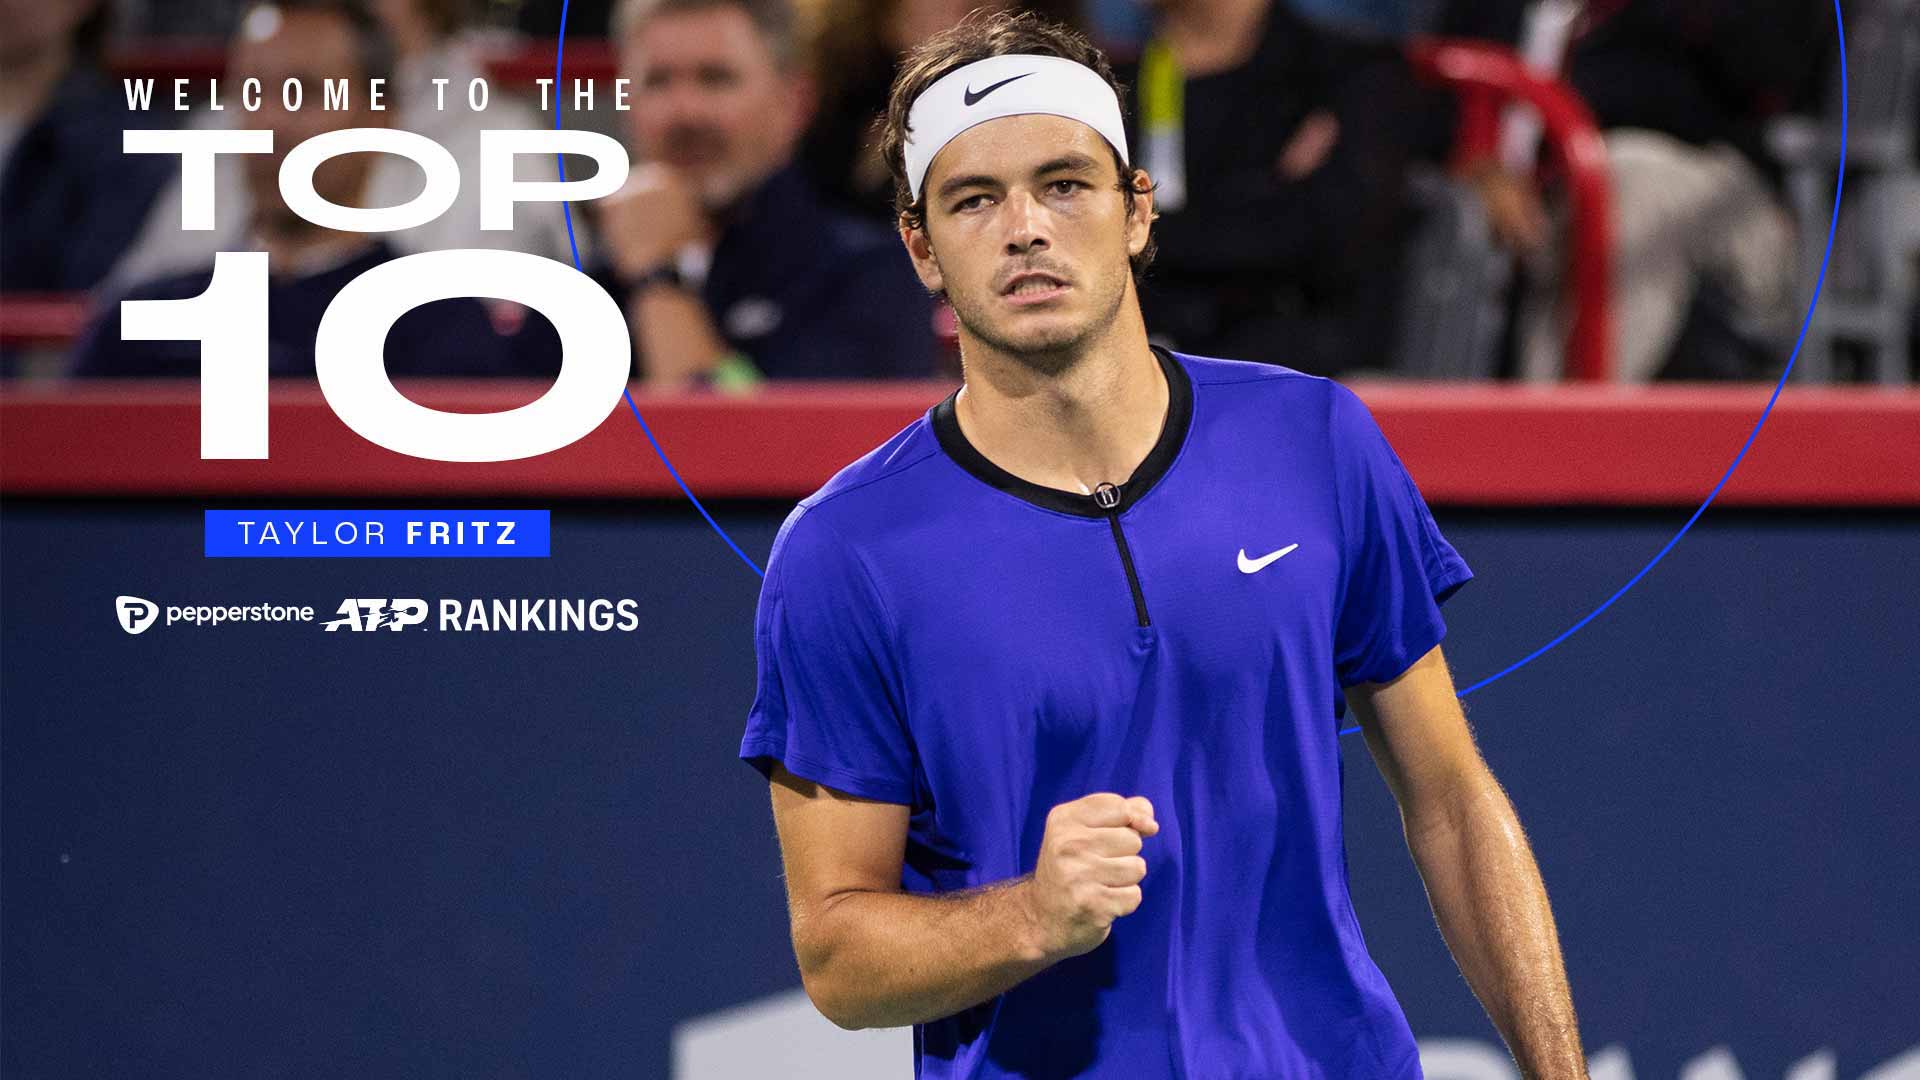 Taylor Fritz is the third player in 2022 to crack the Top 10 in the Pepperstone ATP Rankings.